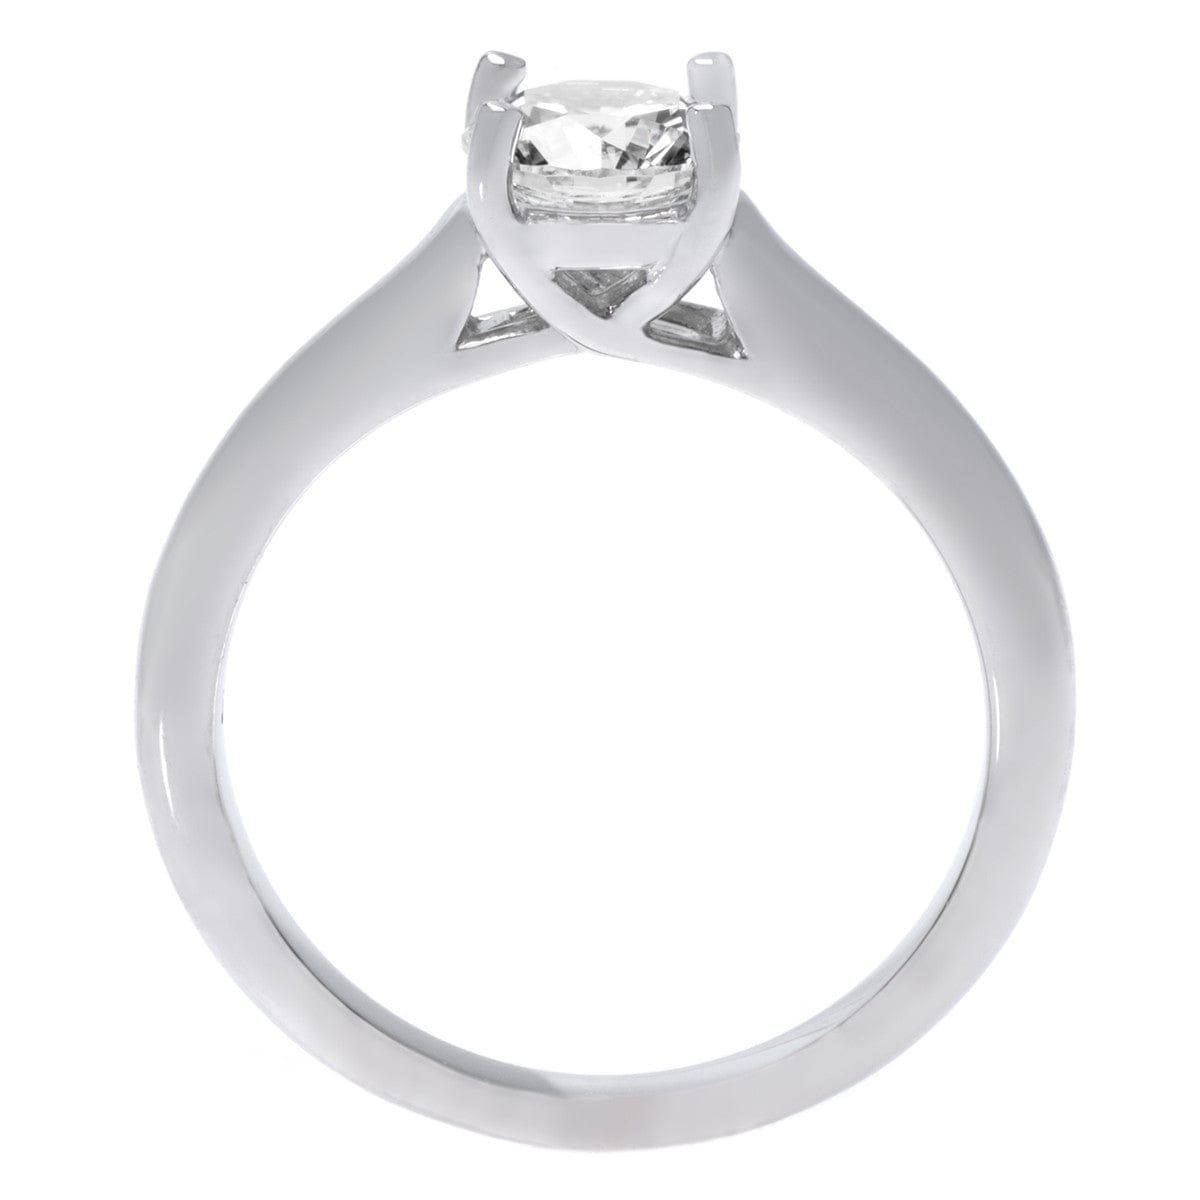 Platinum 4 Prong Solitaire Engagement Ring Setting